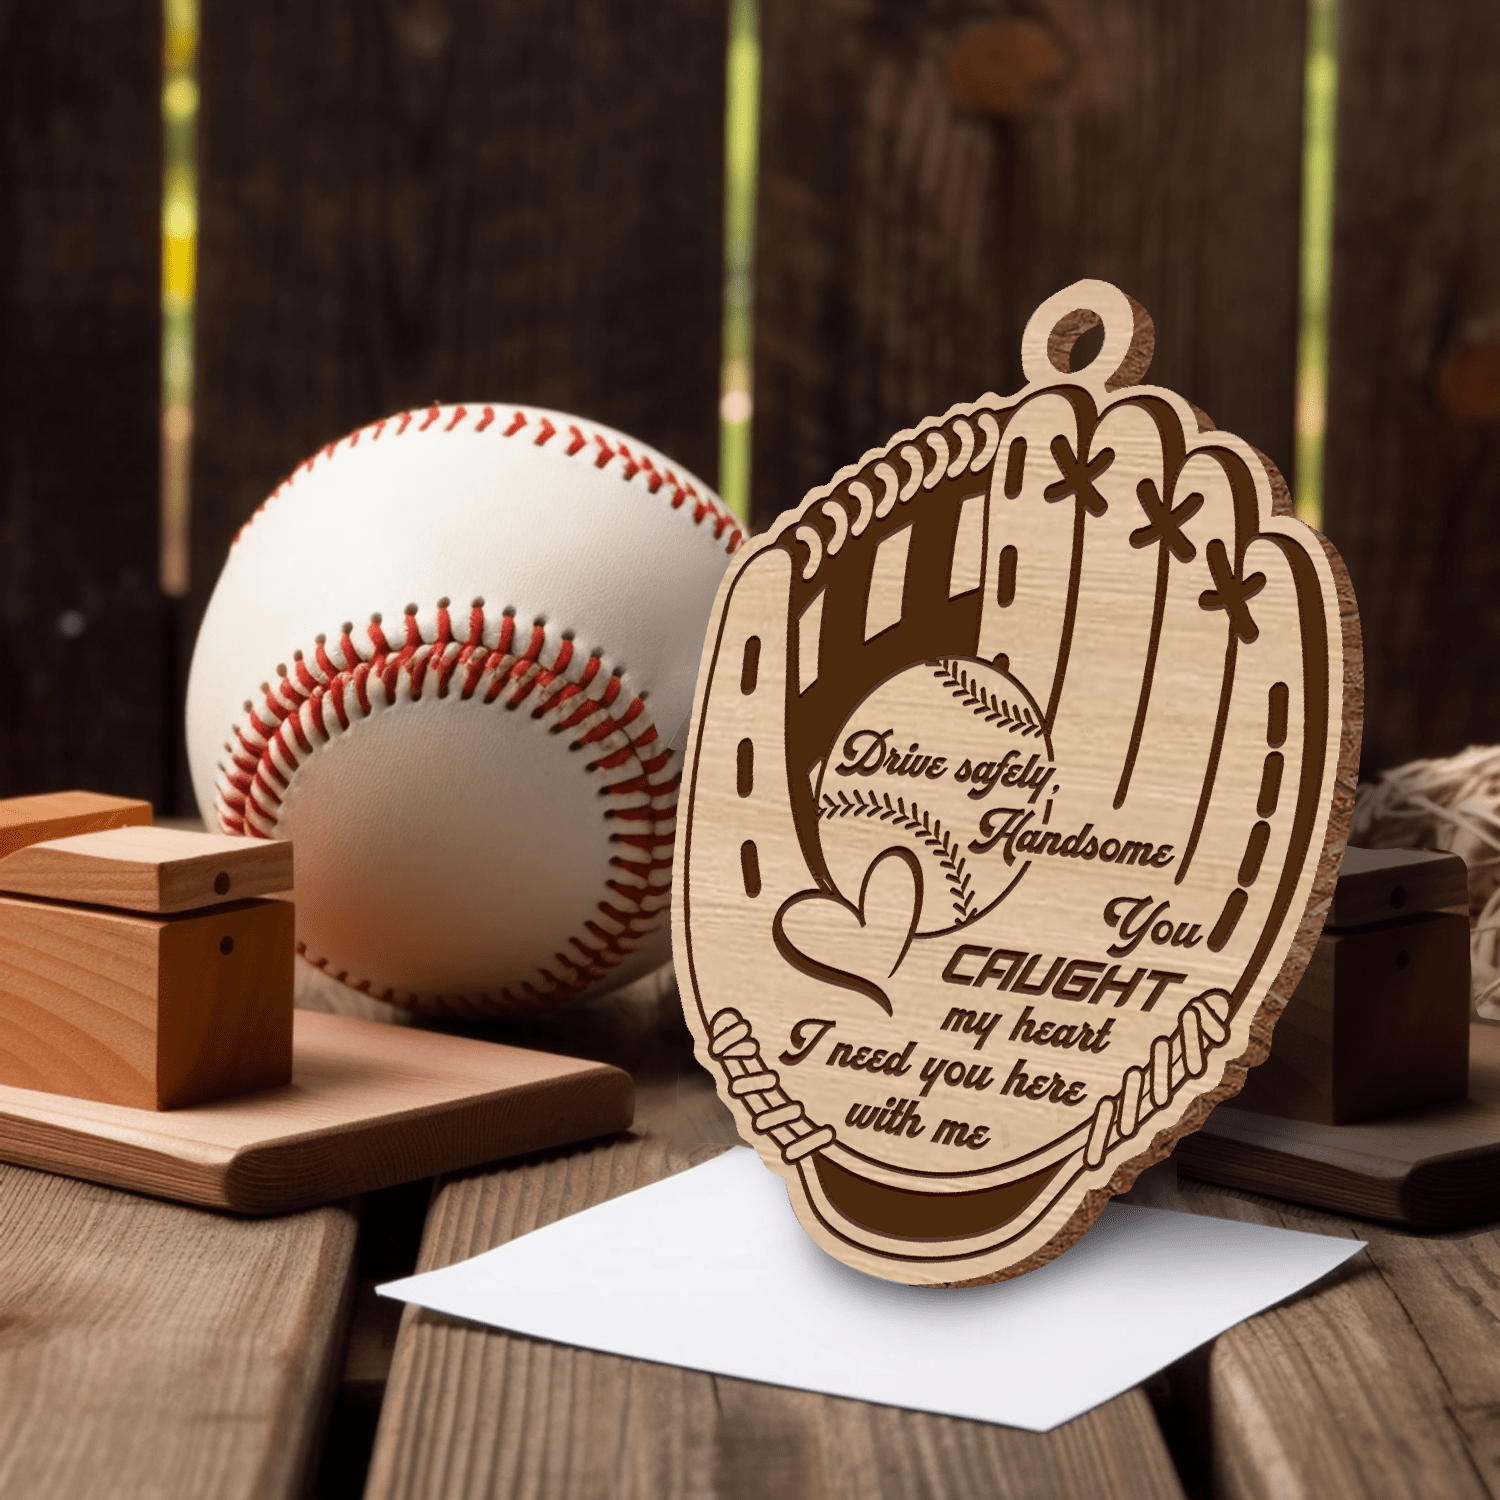 Wooden Ornament Car Accessories - Baseball - To My Man - You Caught My Heart - Gap26003